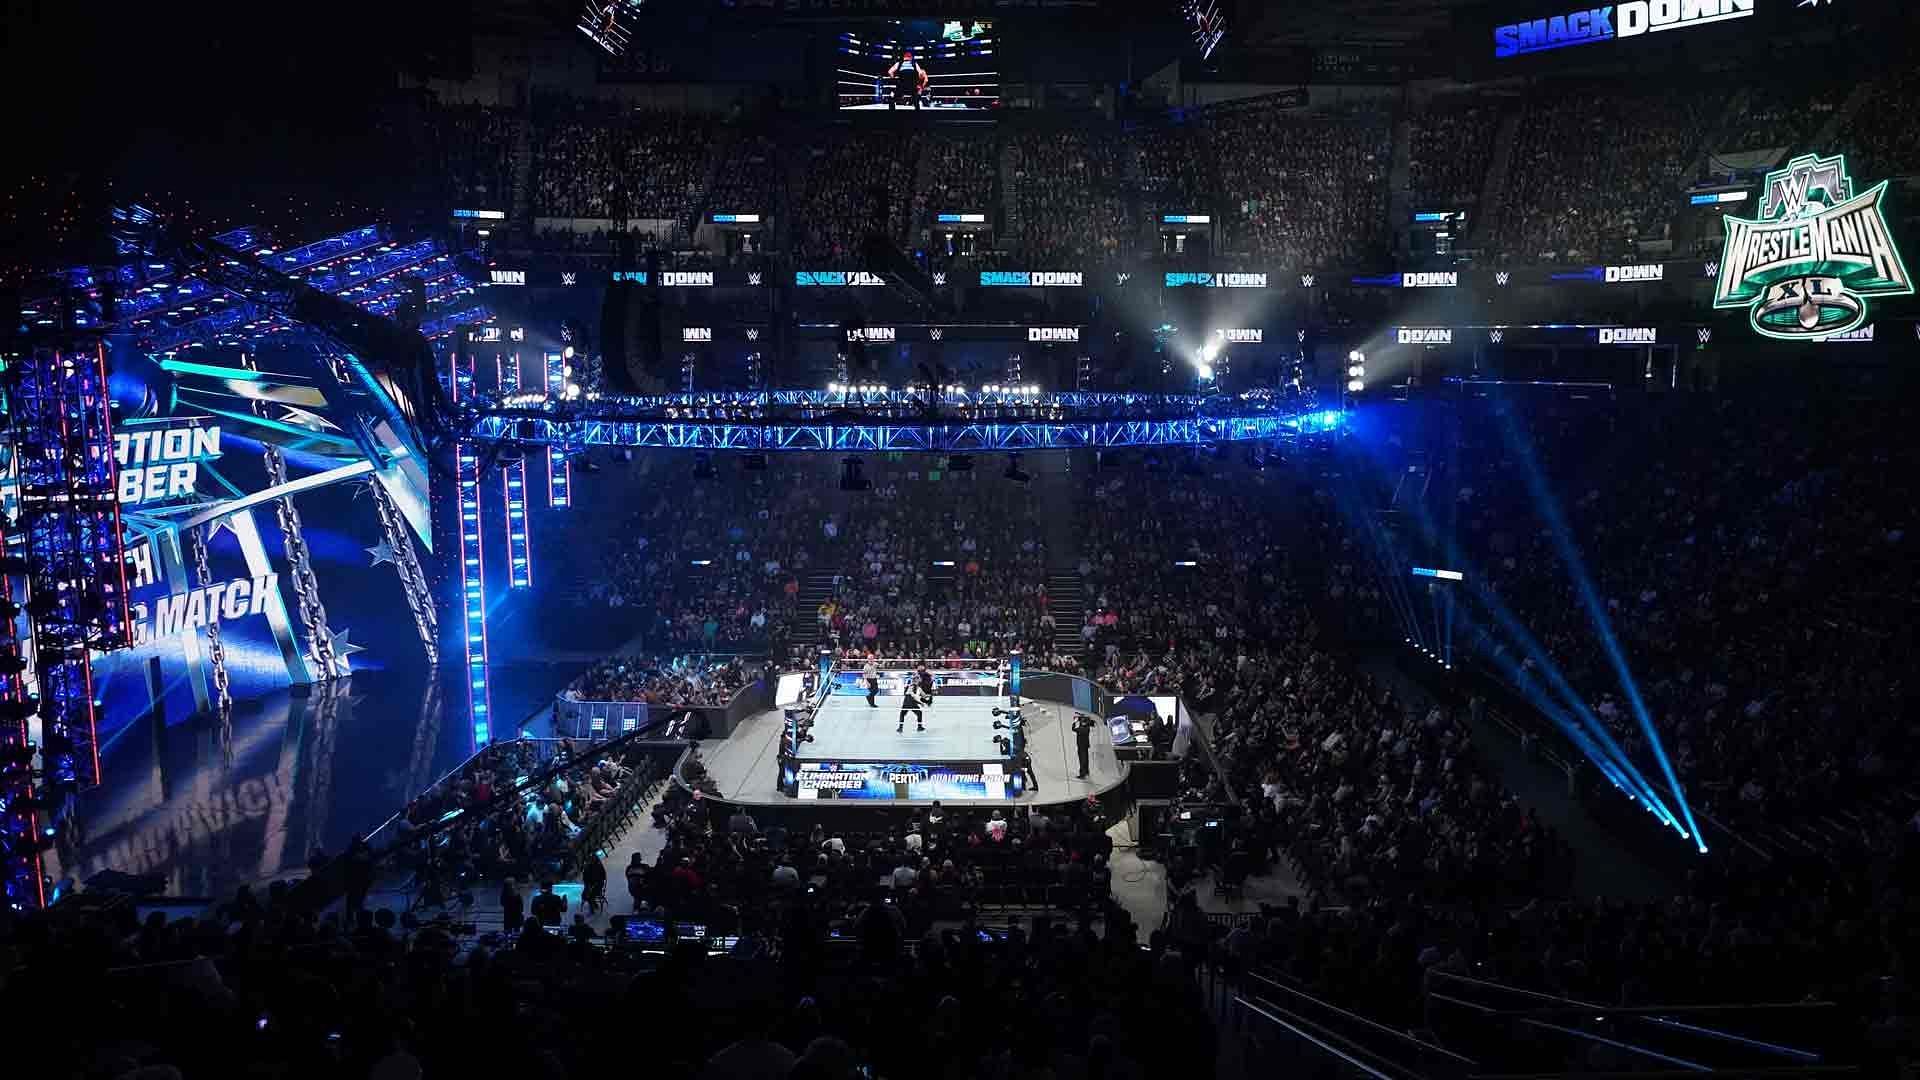 The WWE Universe packs the local arena for a live SmackDown episode